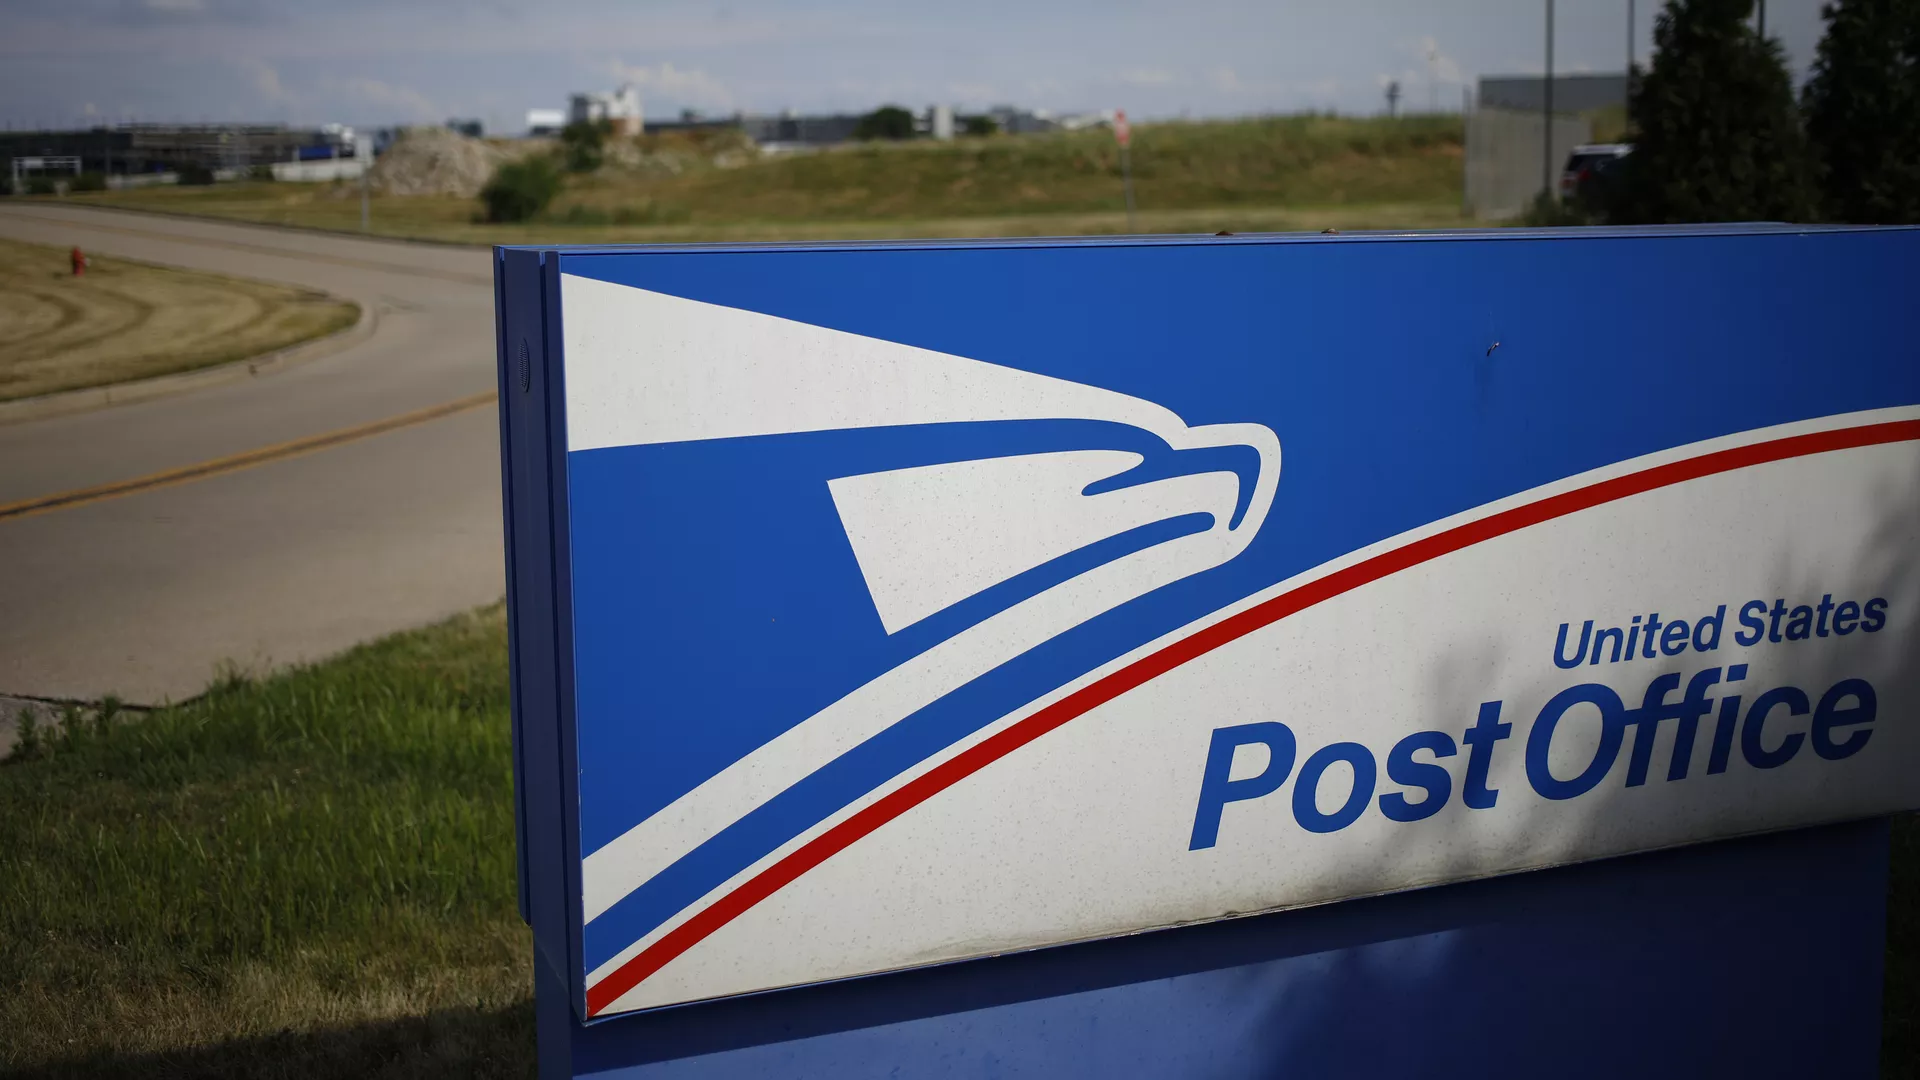 USPS stamp prices increased on Sunday